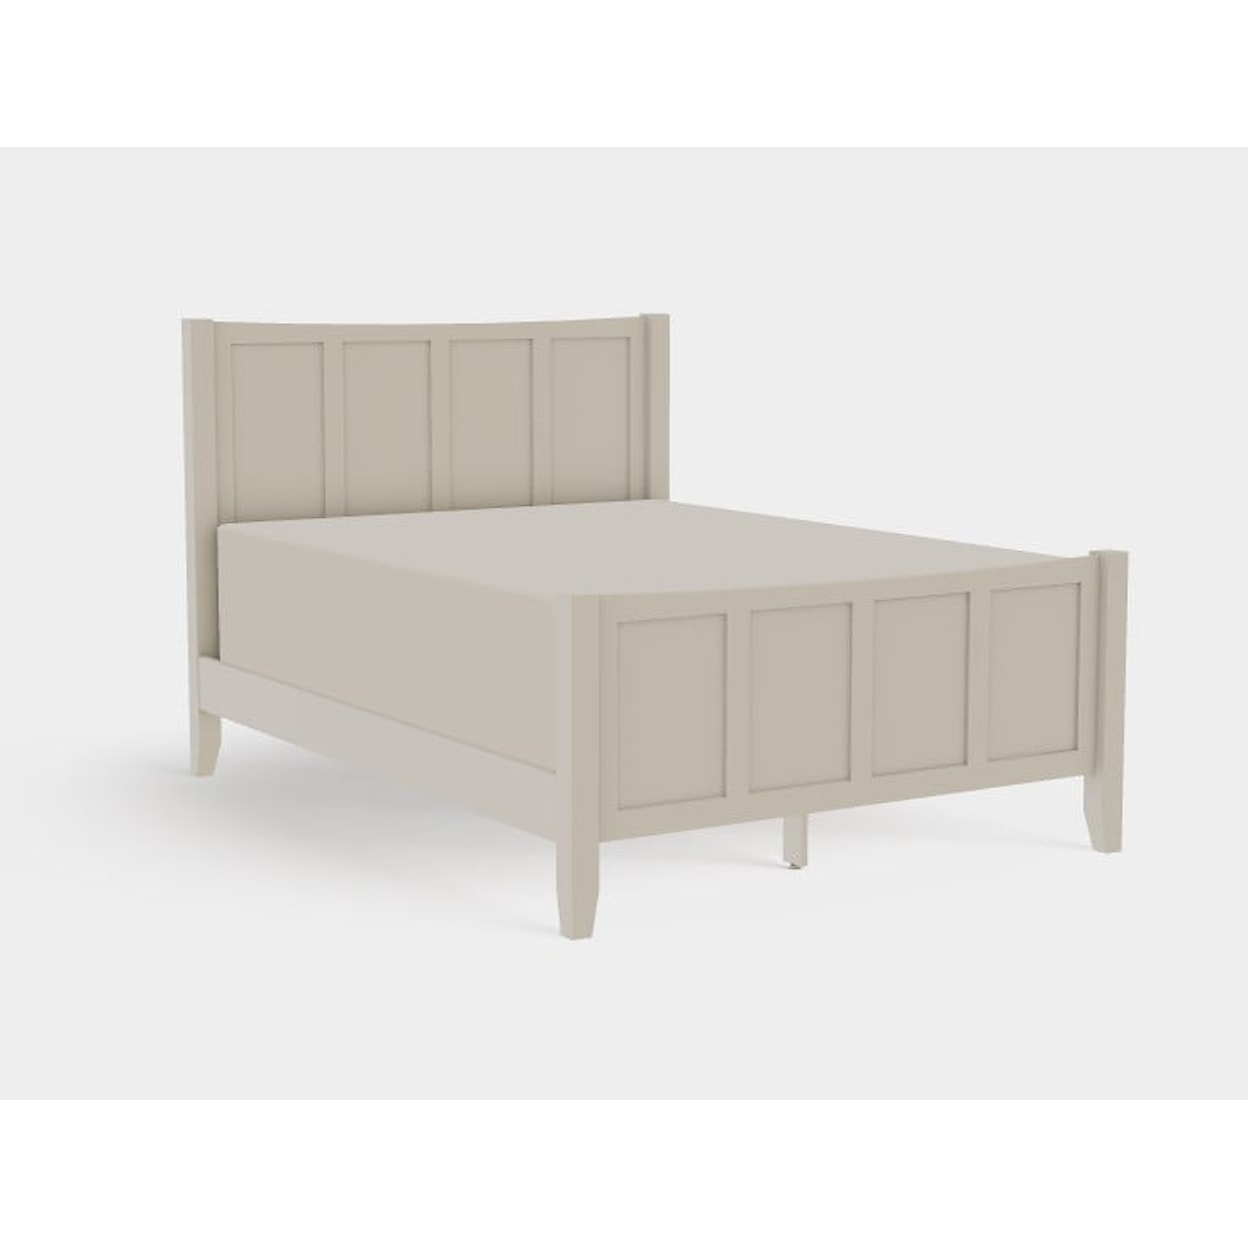 Mavin Atwood Group Atwood Queen High Footboard Panel Bed